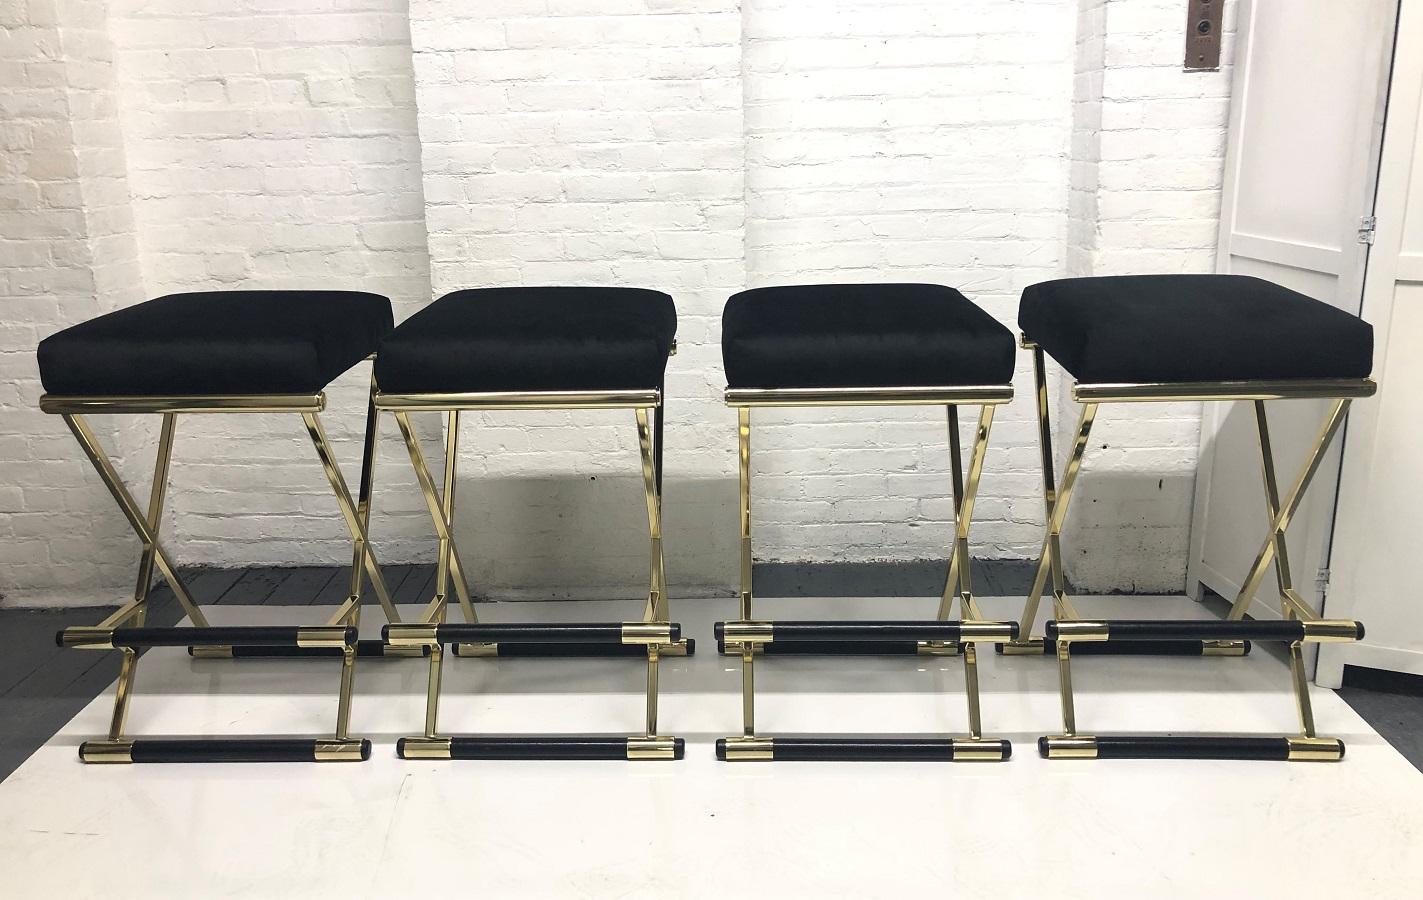 Set of four 1980s velvet and brass finish bar stools. The frames are brass finish and the footrests and bases are covered in black vinyl. The cushions of the bar stools are black velvet.